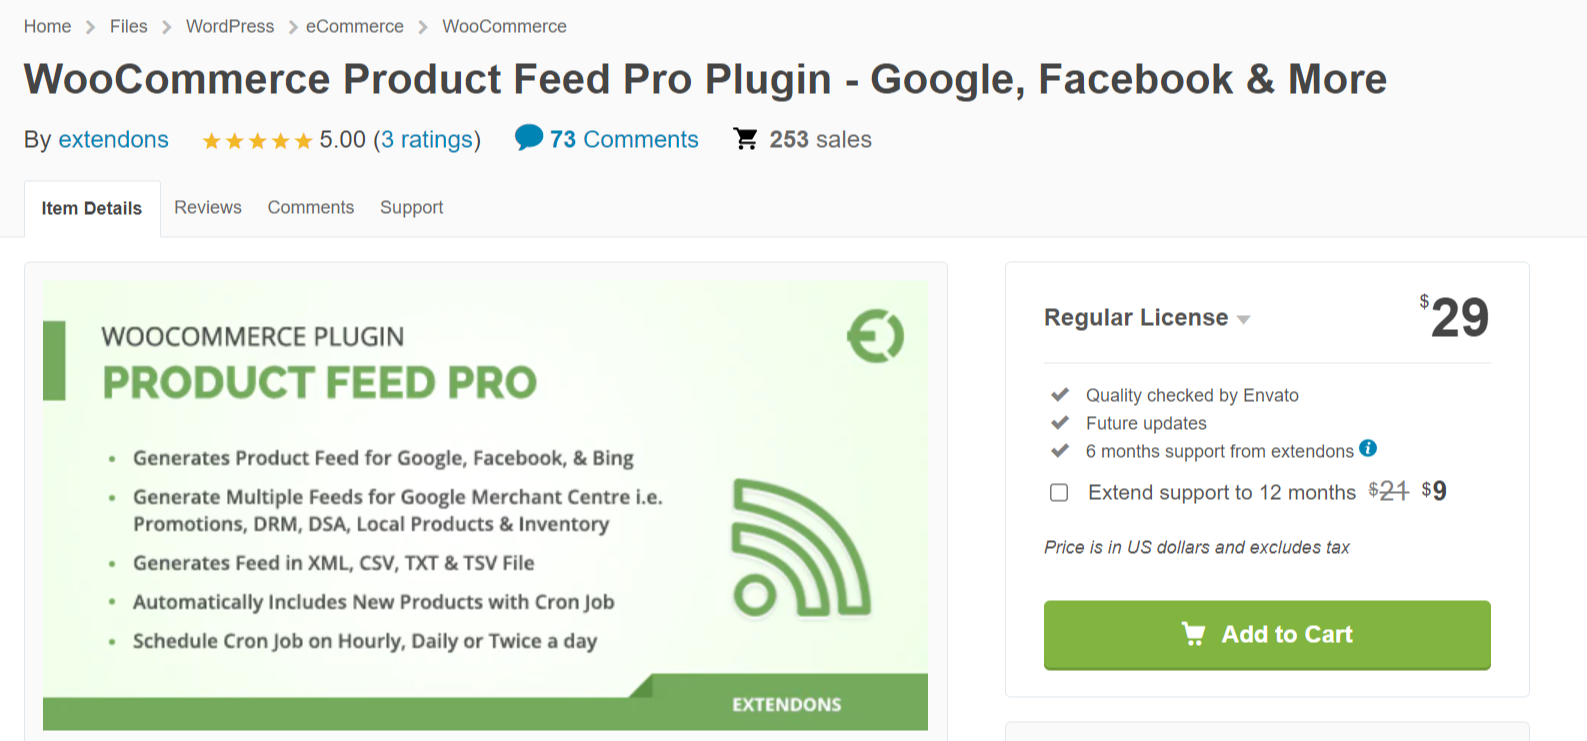 Export your WooCommerce Product Feed with the help of these Google Shopping Plugins | WooCommerce product feed pro